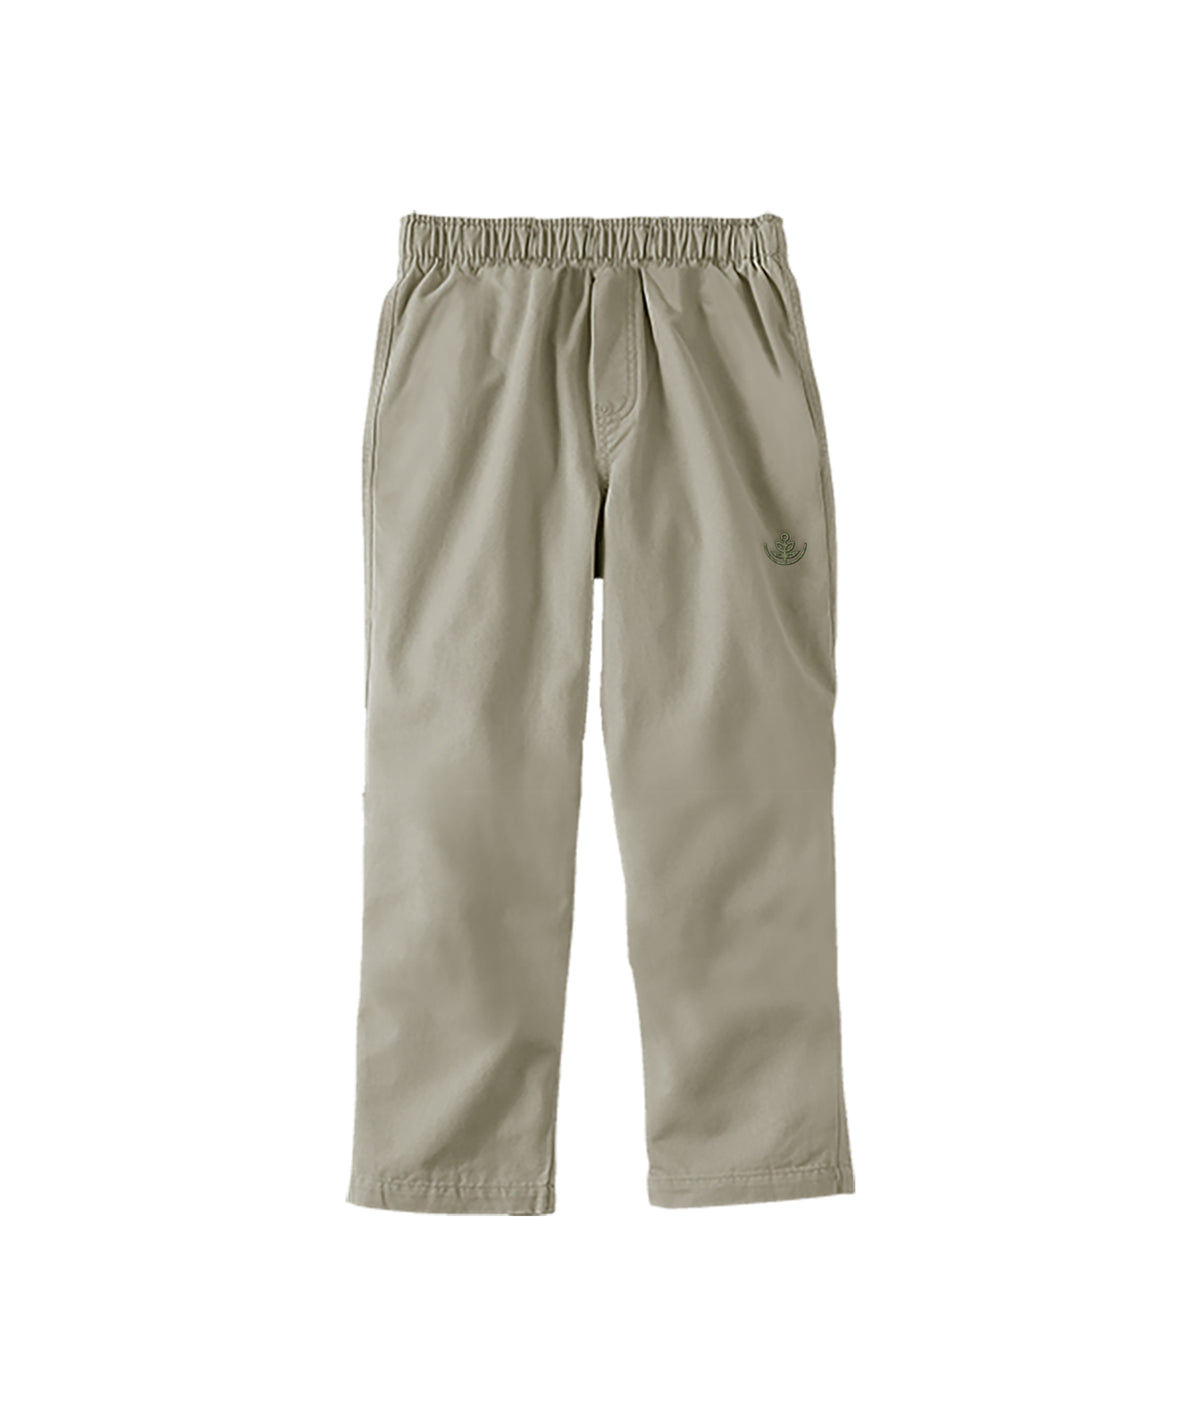 ROTHEWOOD RUGBY PANTS, TODDLER